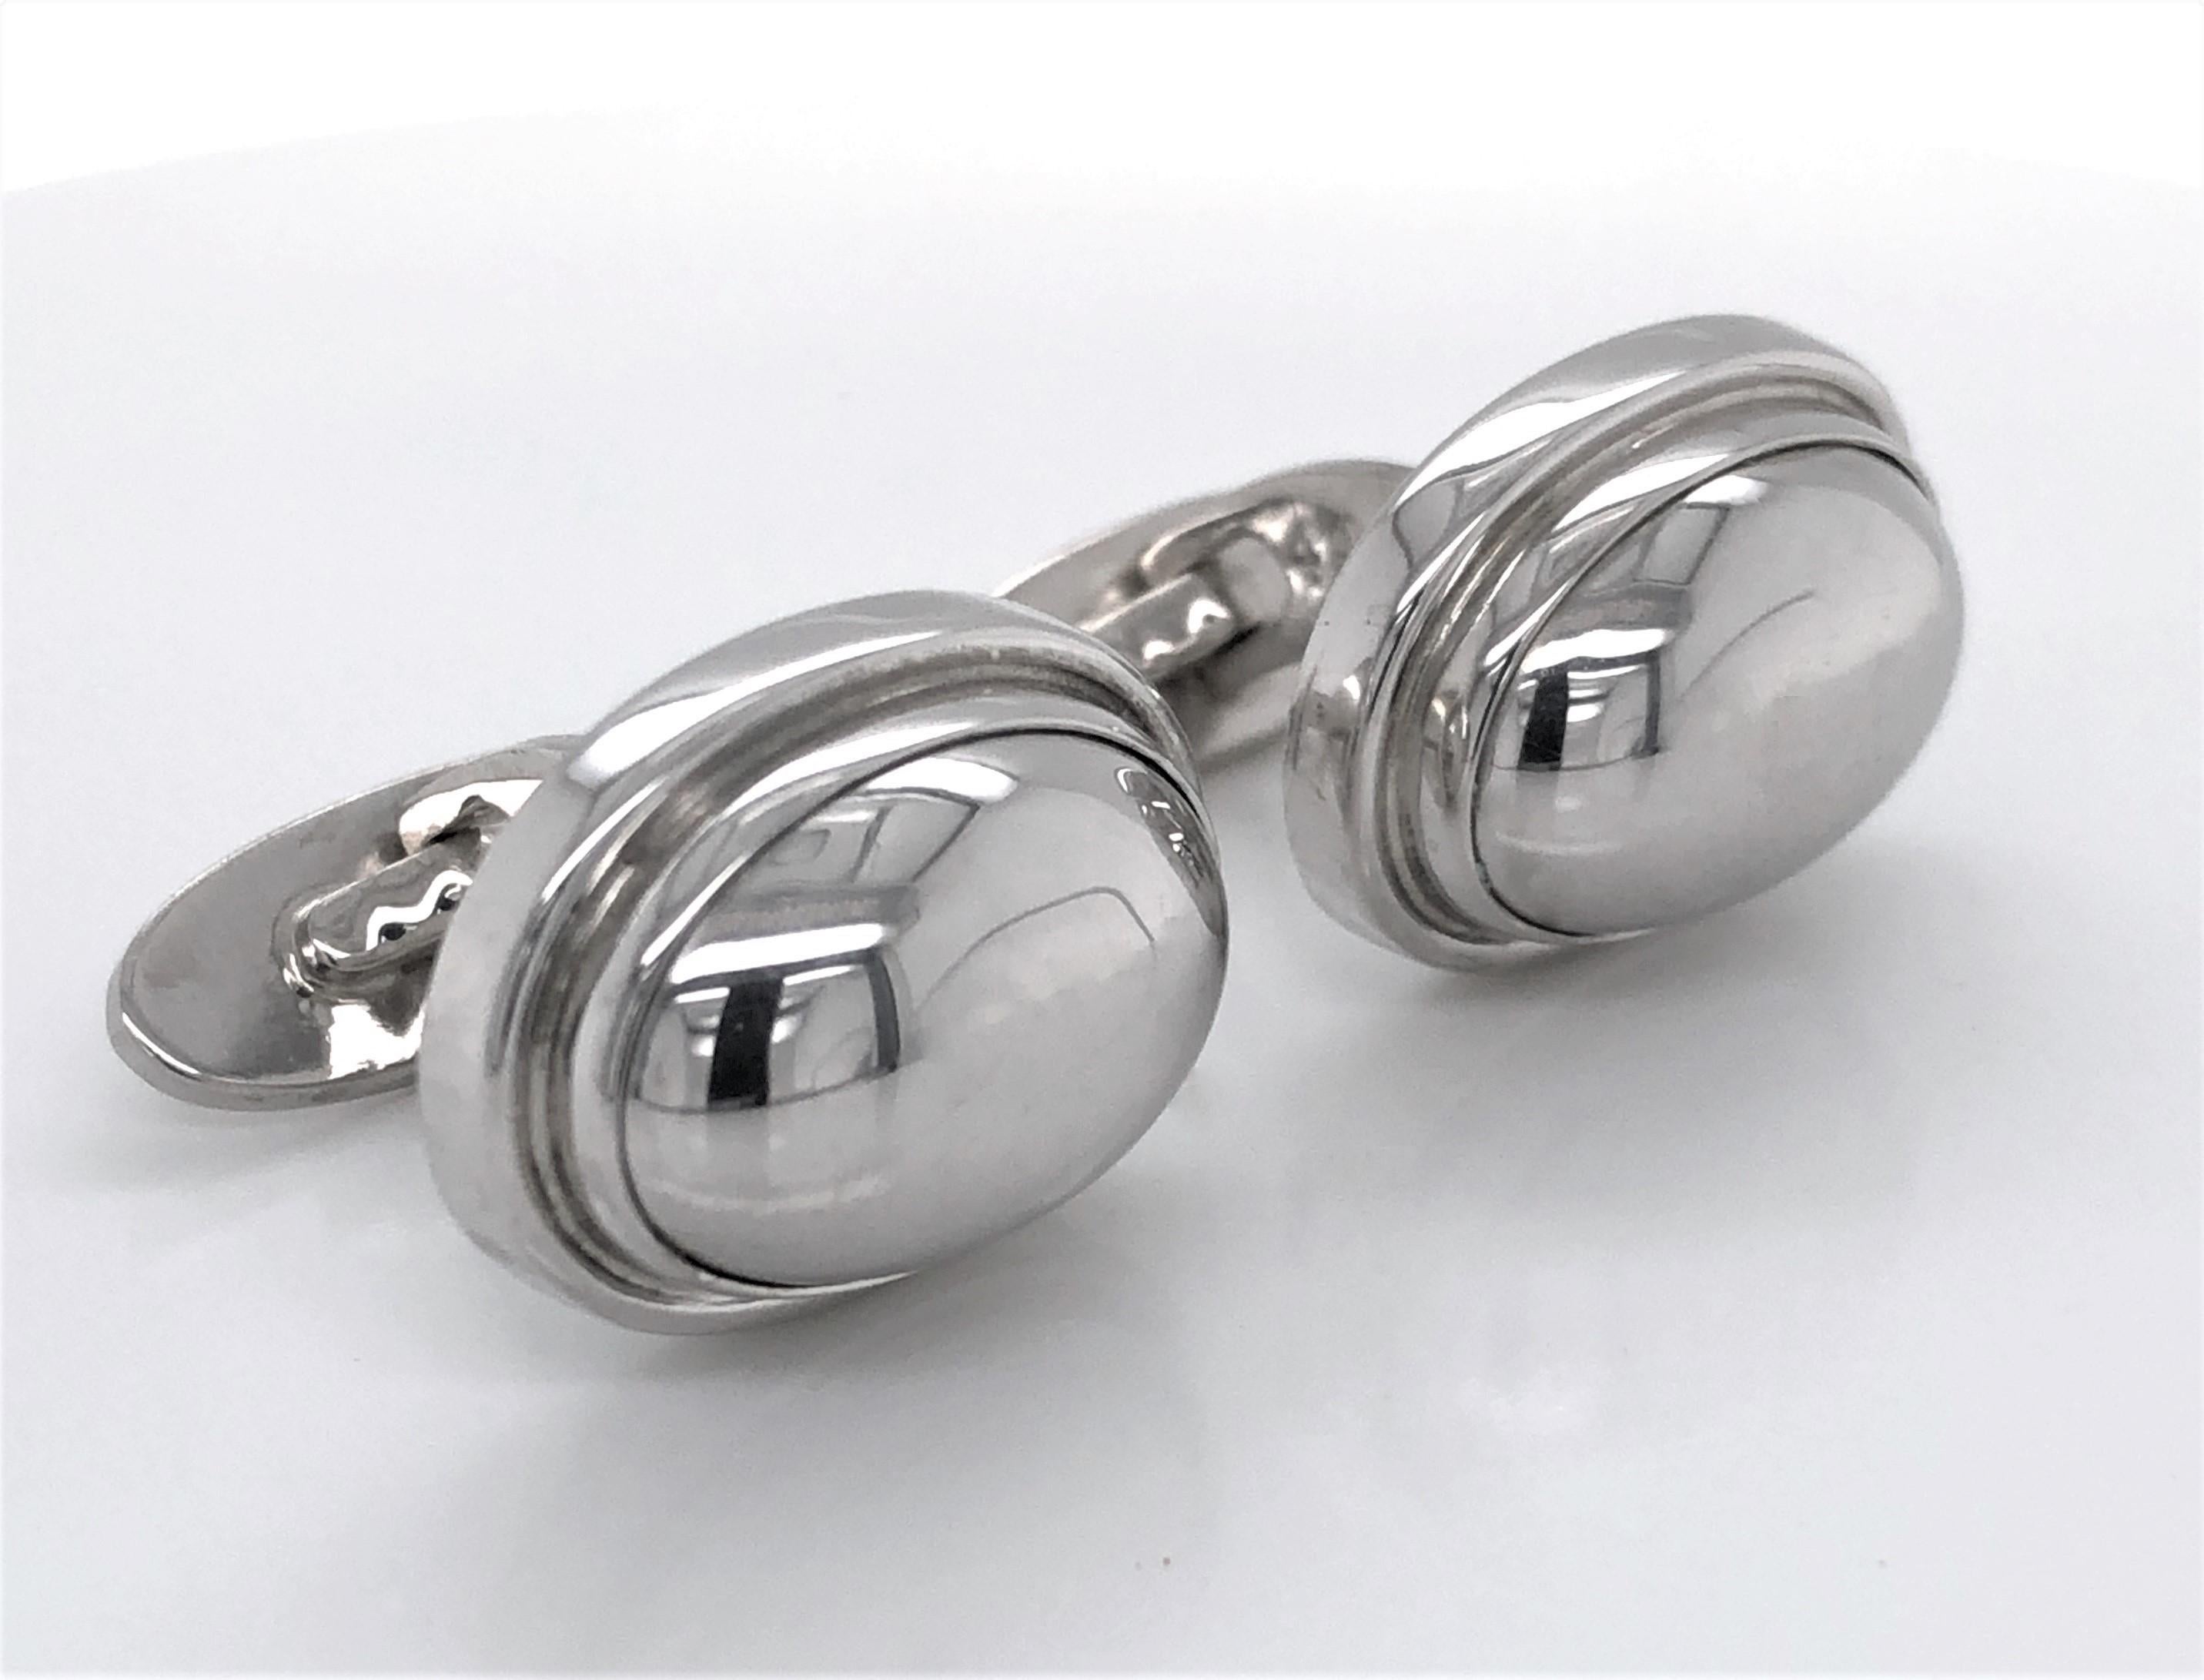 Classic and timeless by Danish silver maker Georg Jensen. These oval domed sterling silver cuff links #44B with silver bezel were designed by Harald Nielsen and display
pleasing clean lines found in Scandinavian craftsmanship. Circa 1950 - 1999,